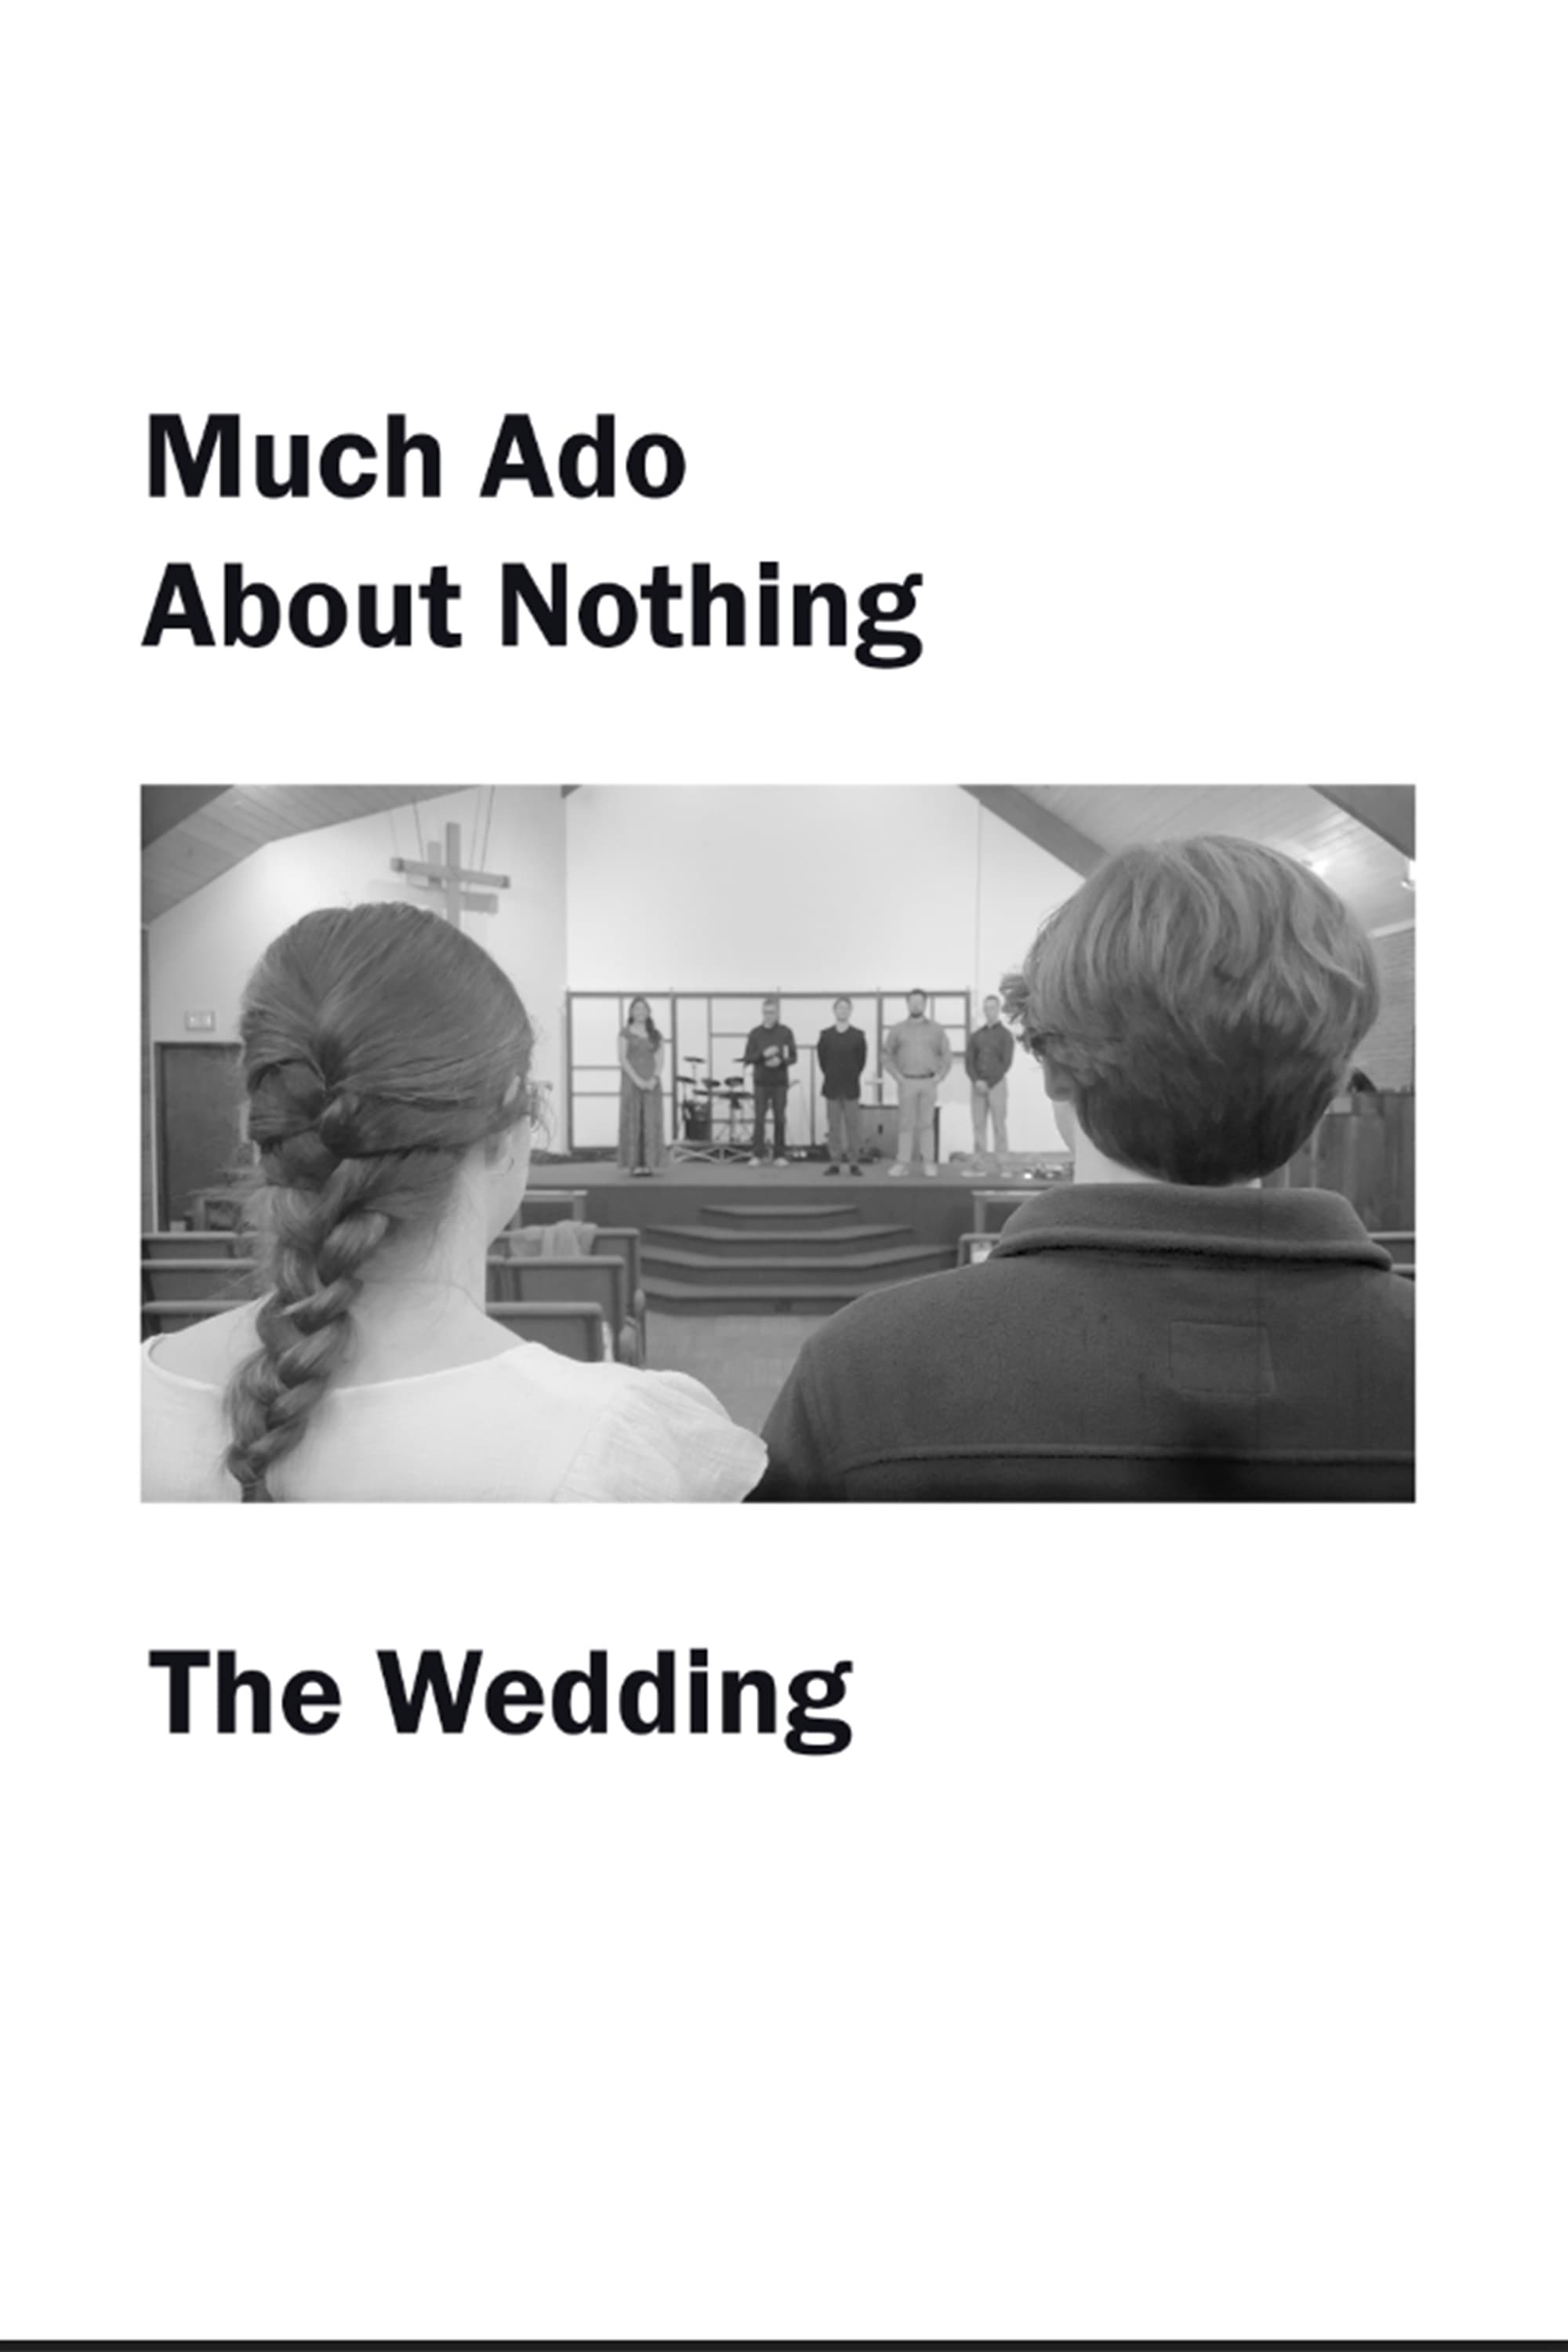 Much Ado About Nothing: The Wedding